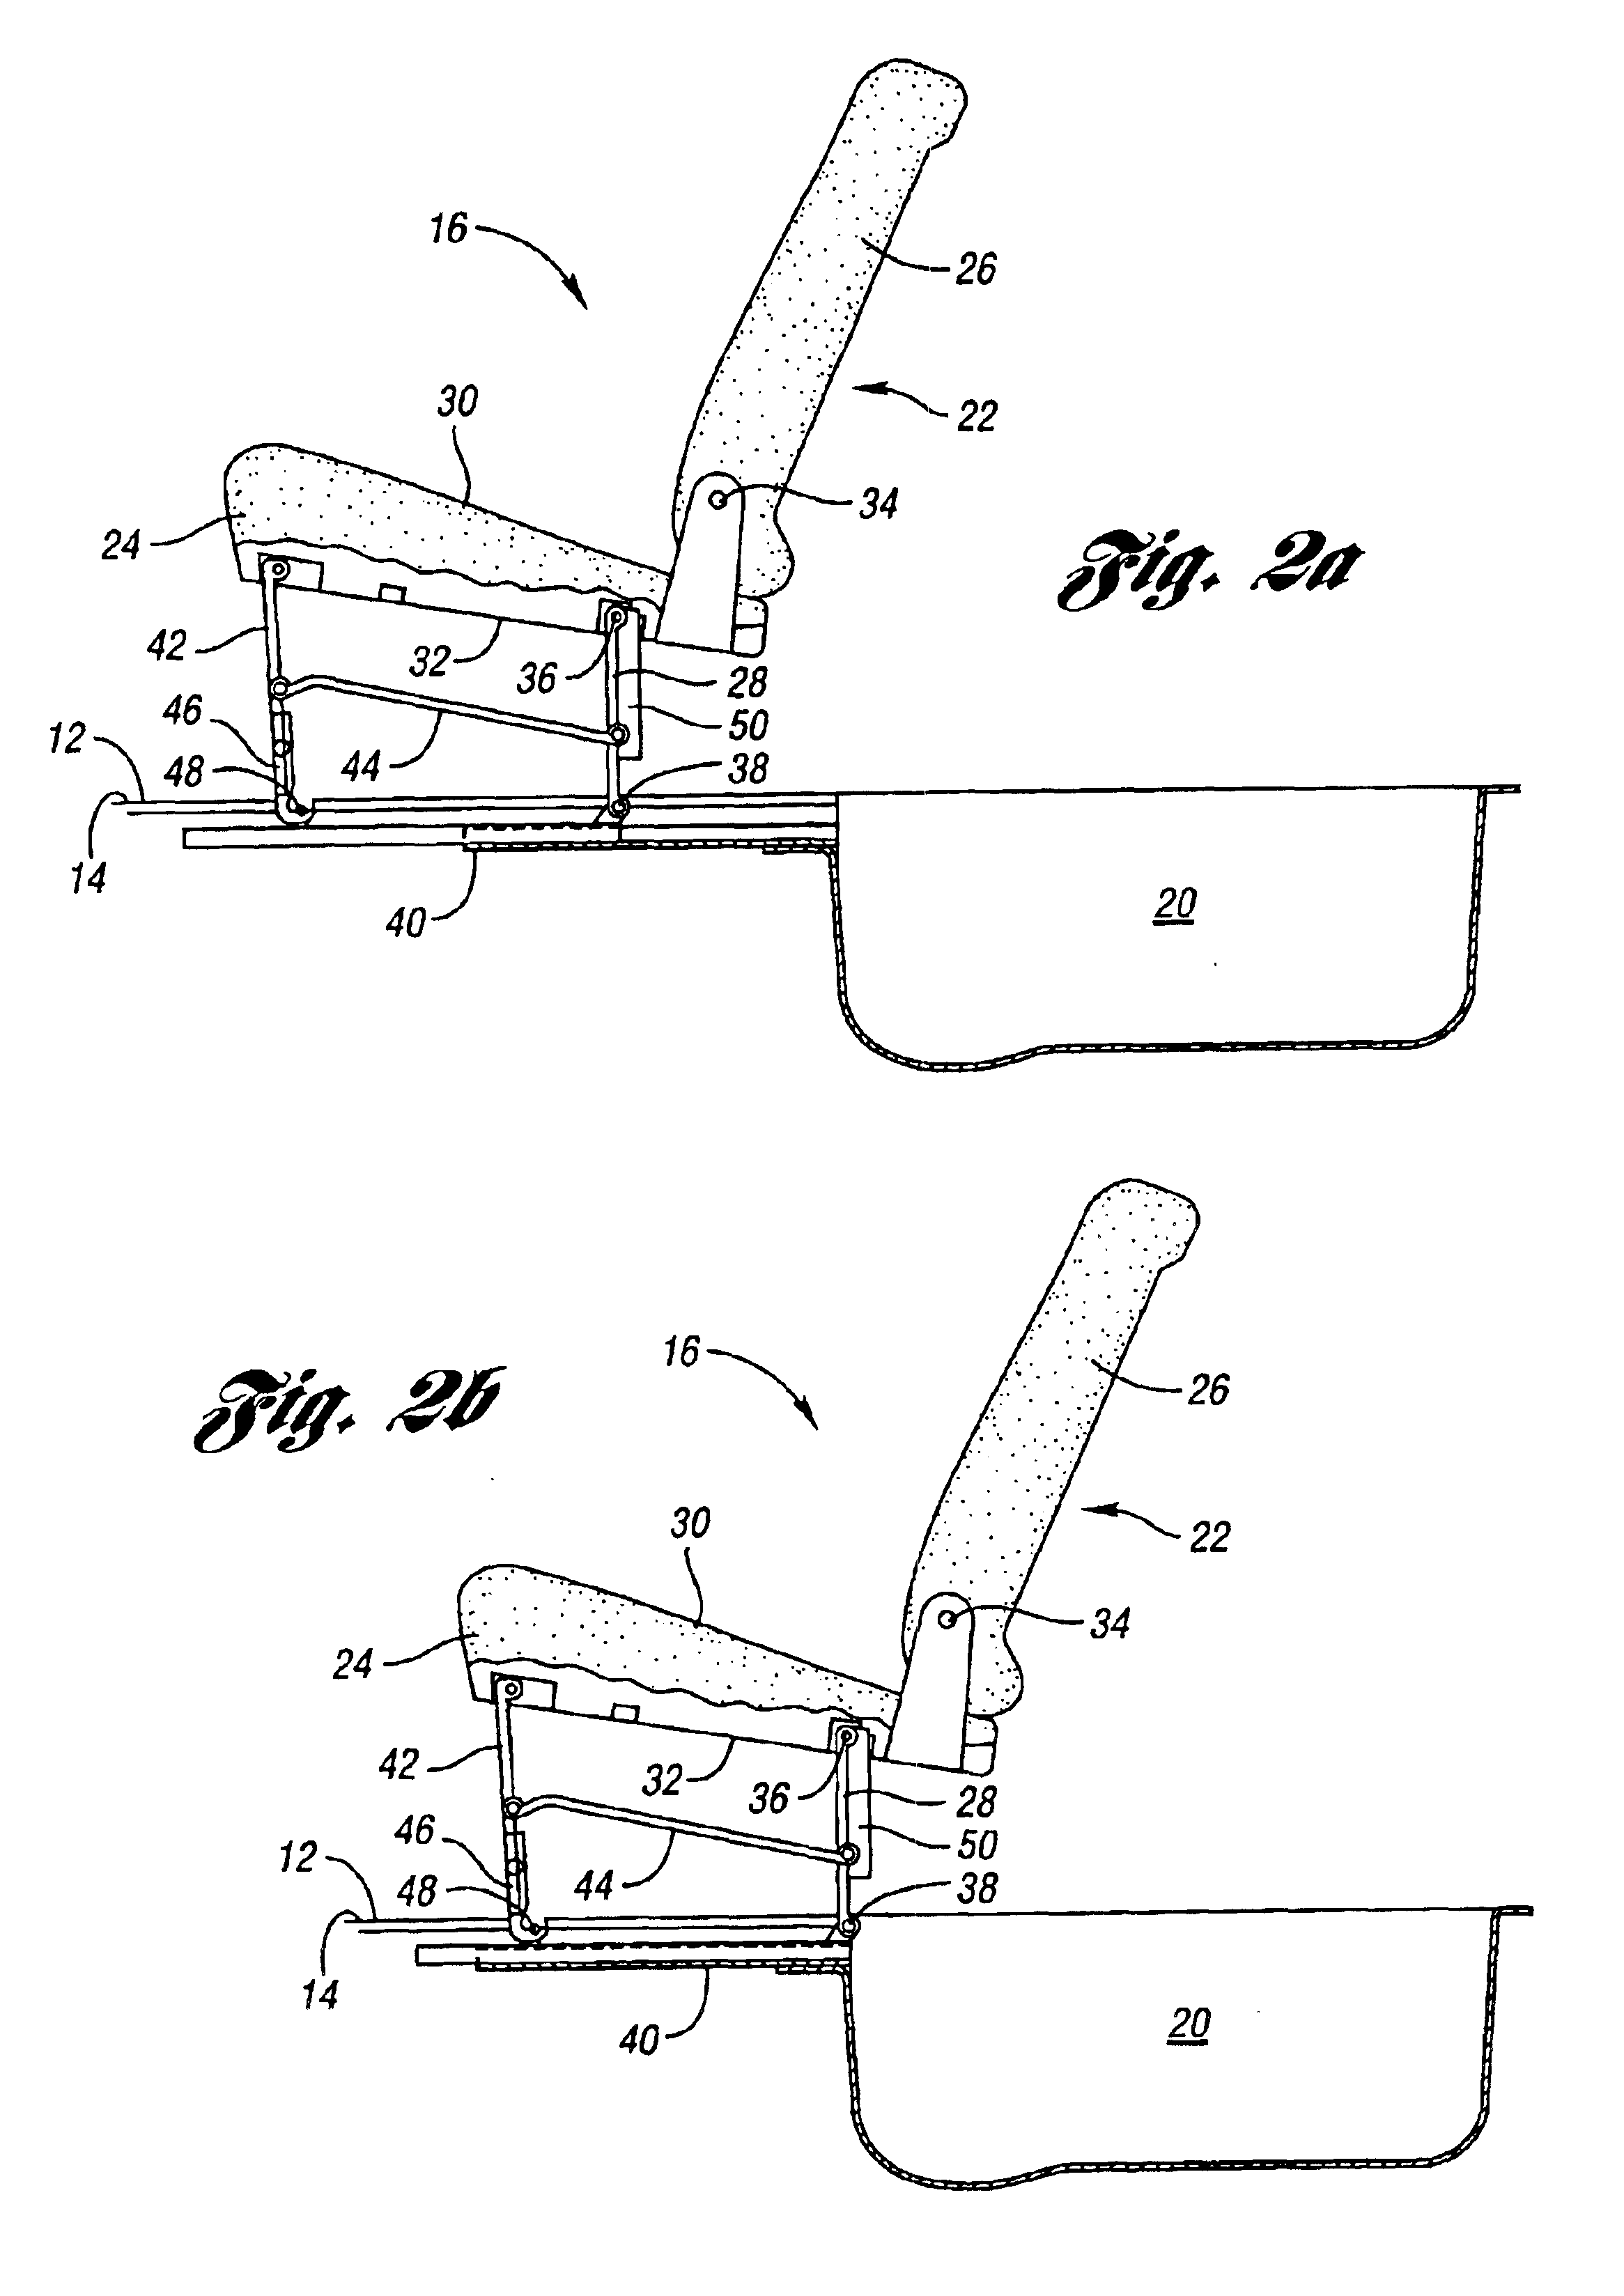 Underfloor stowage of a folding seat in a vehicle